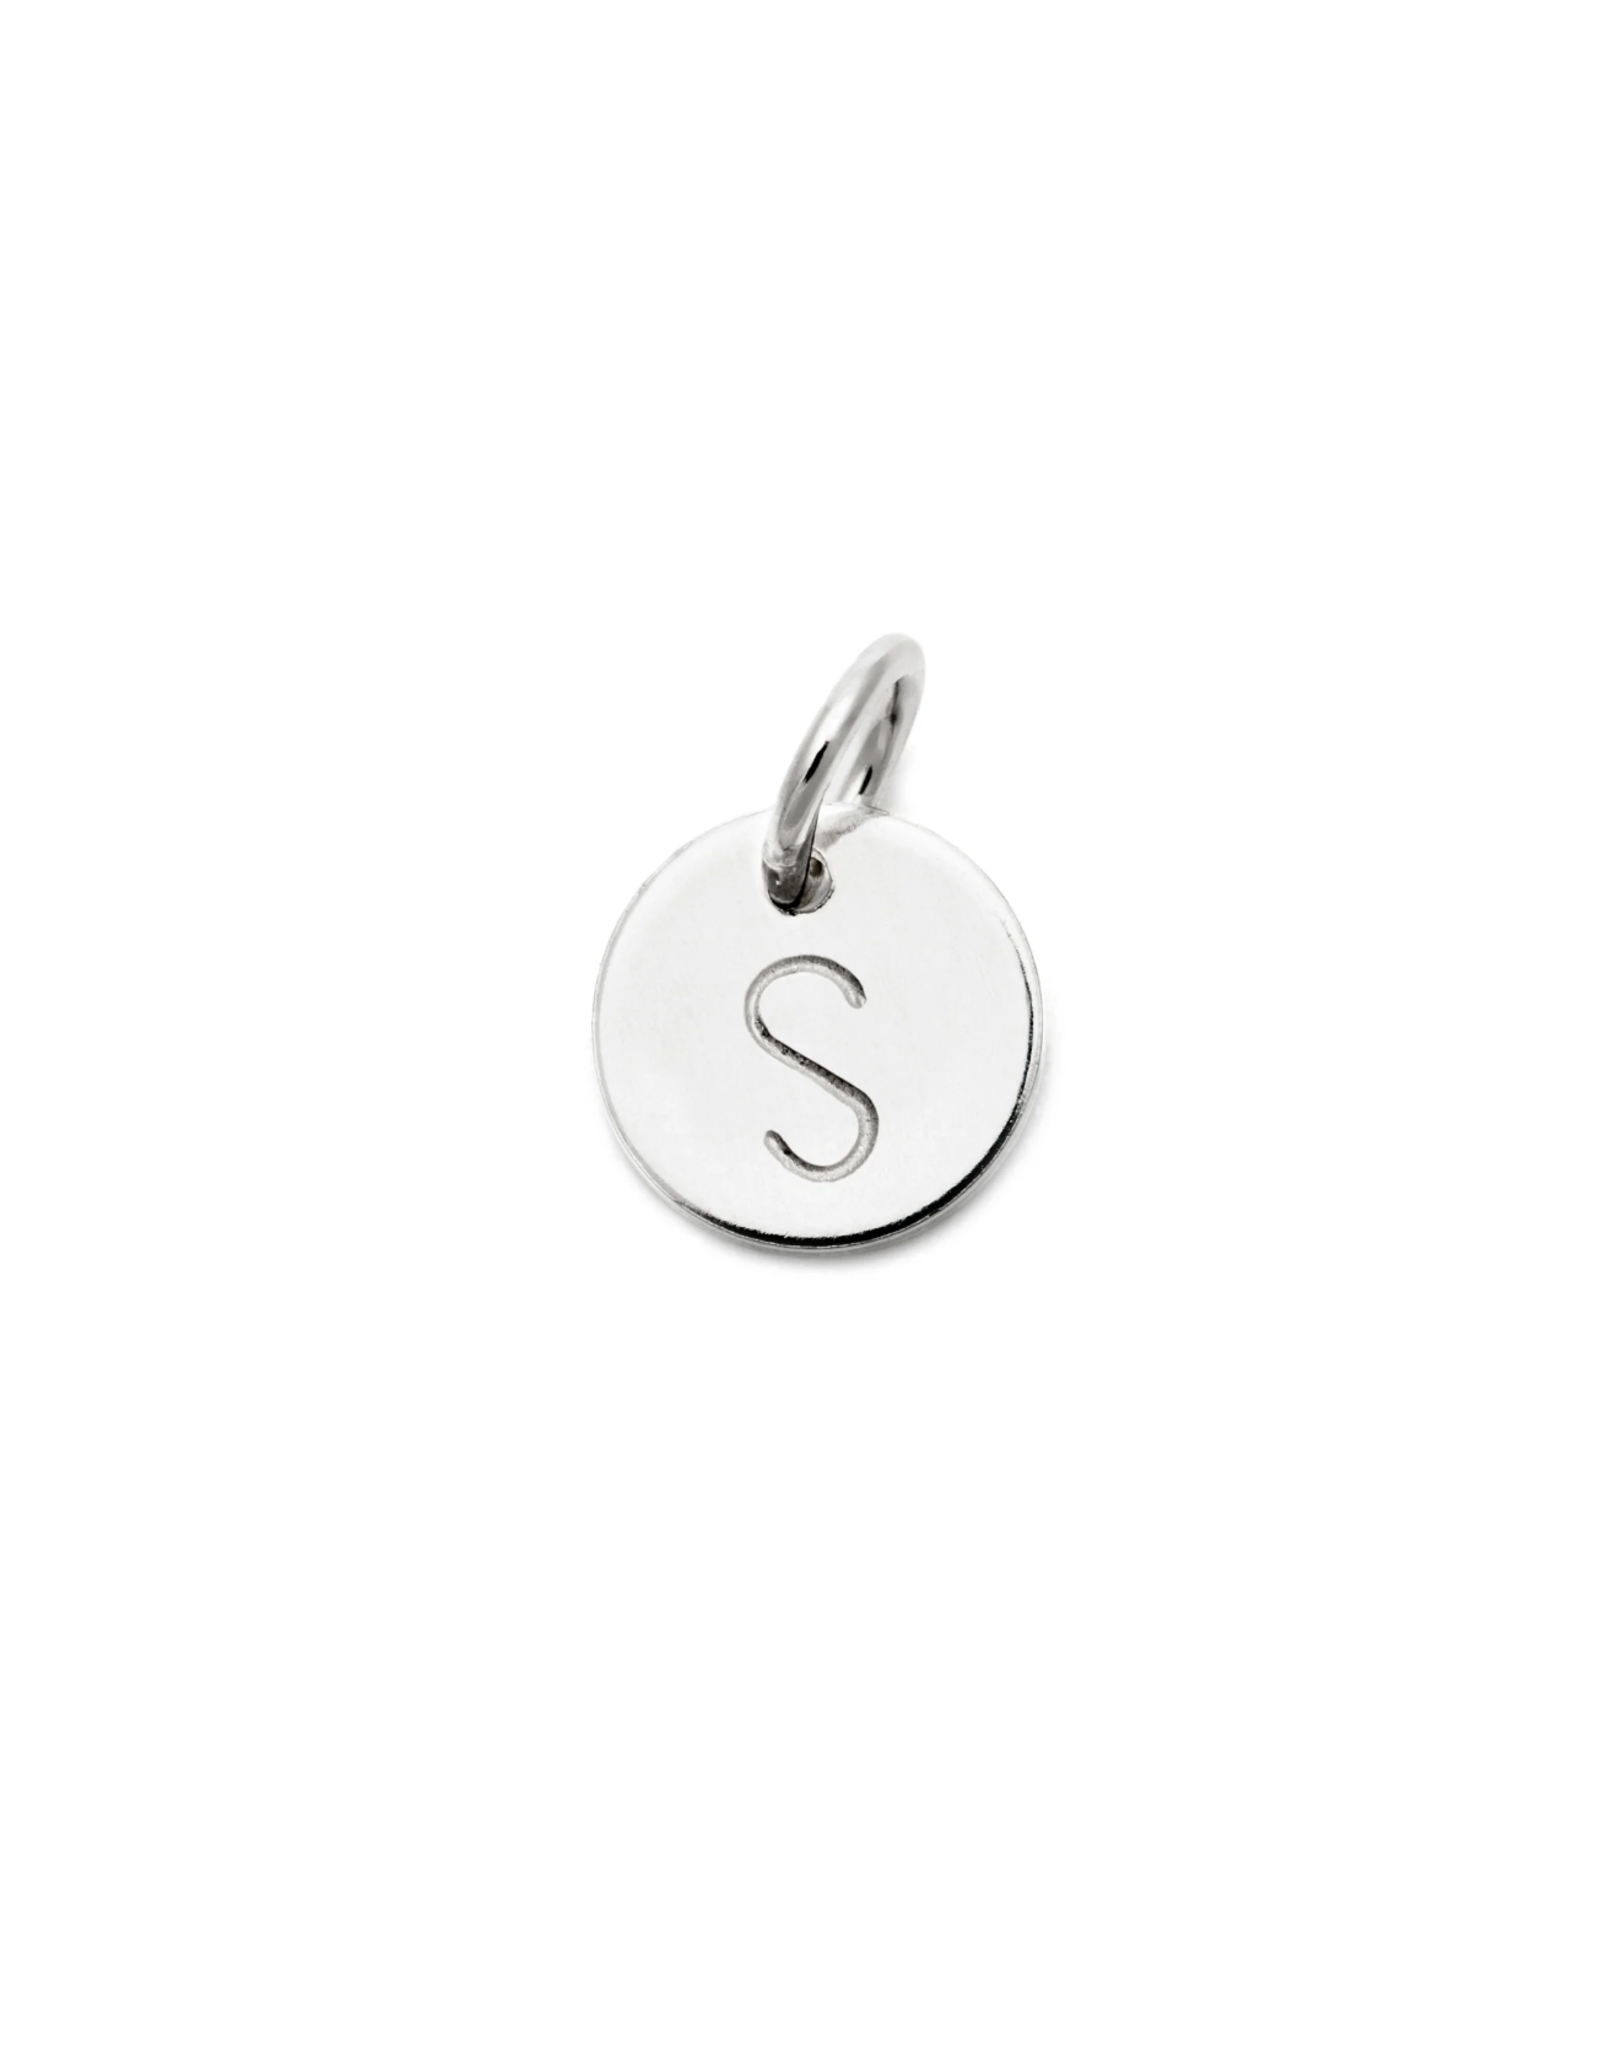 Laughing Sparrow Laughing Sparrow - Dear Heart Letter Charm - S